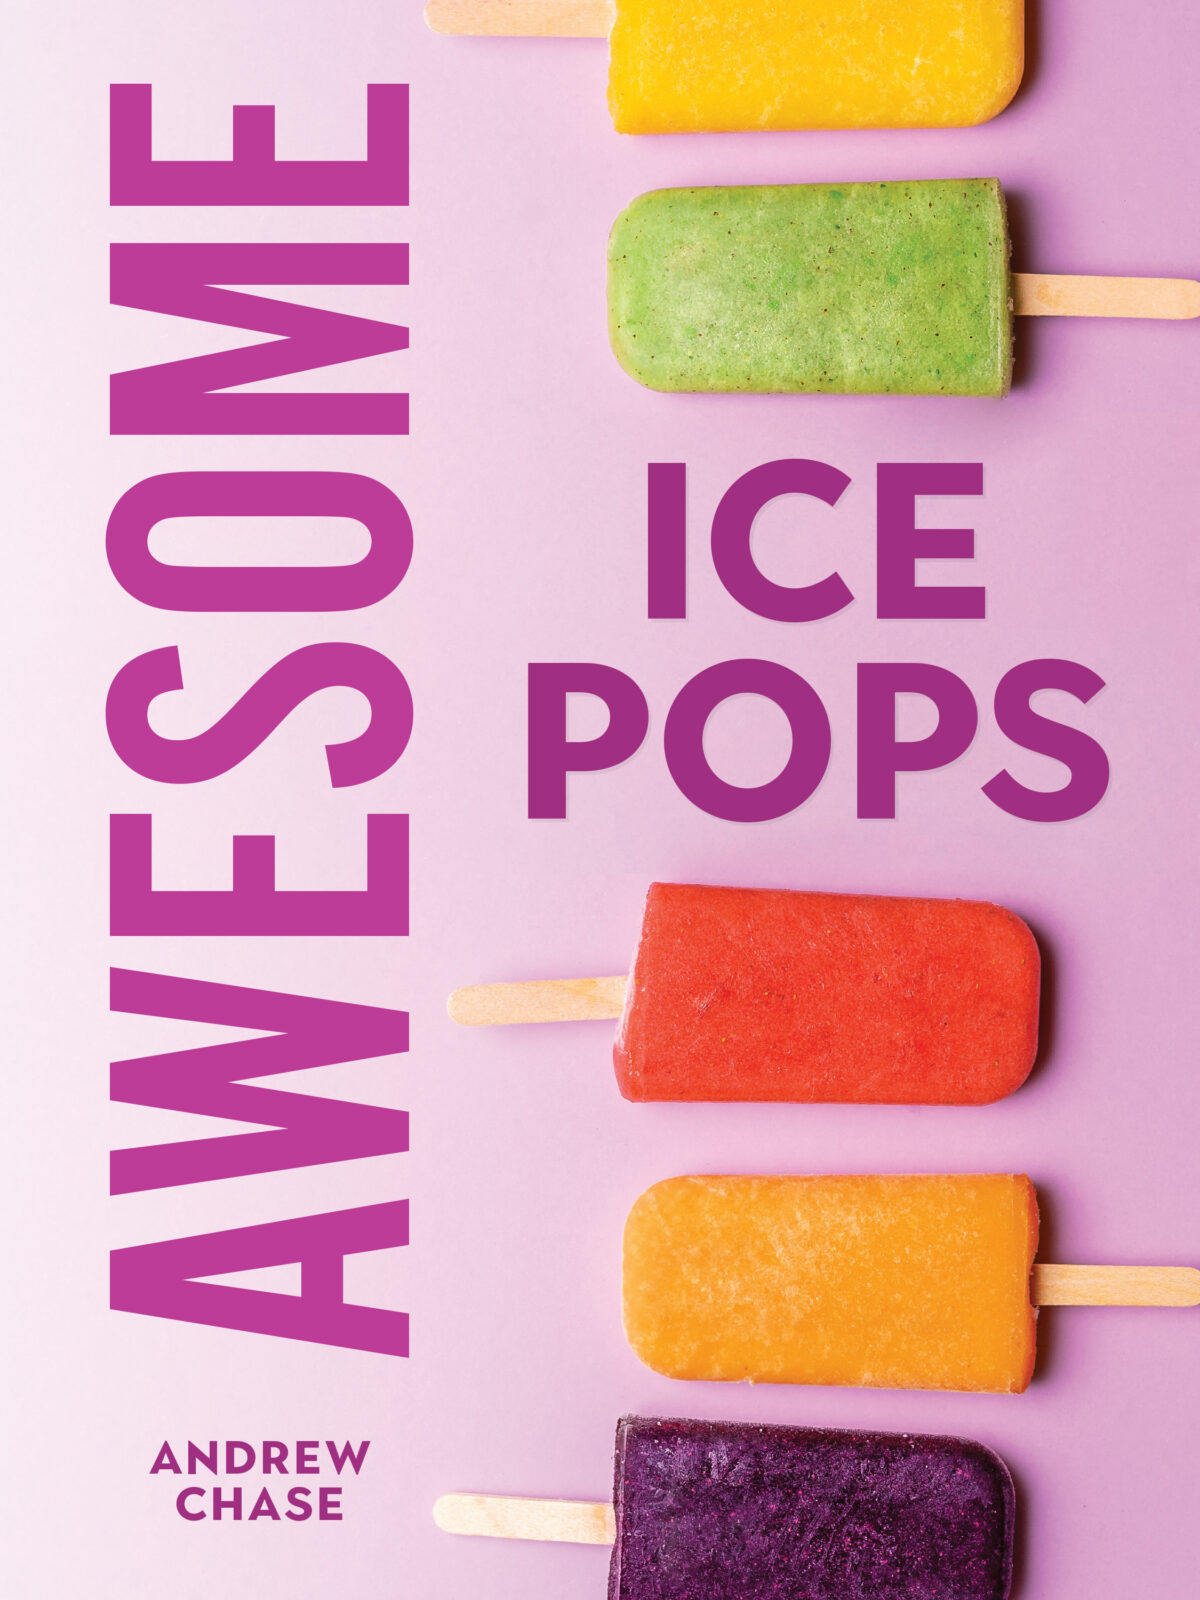 Awesome Ice Pops